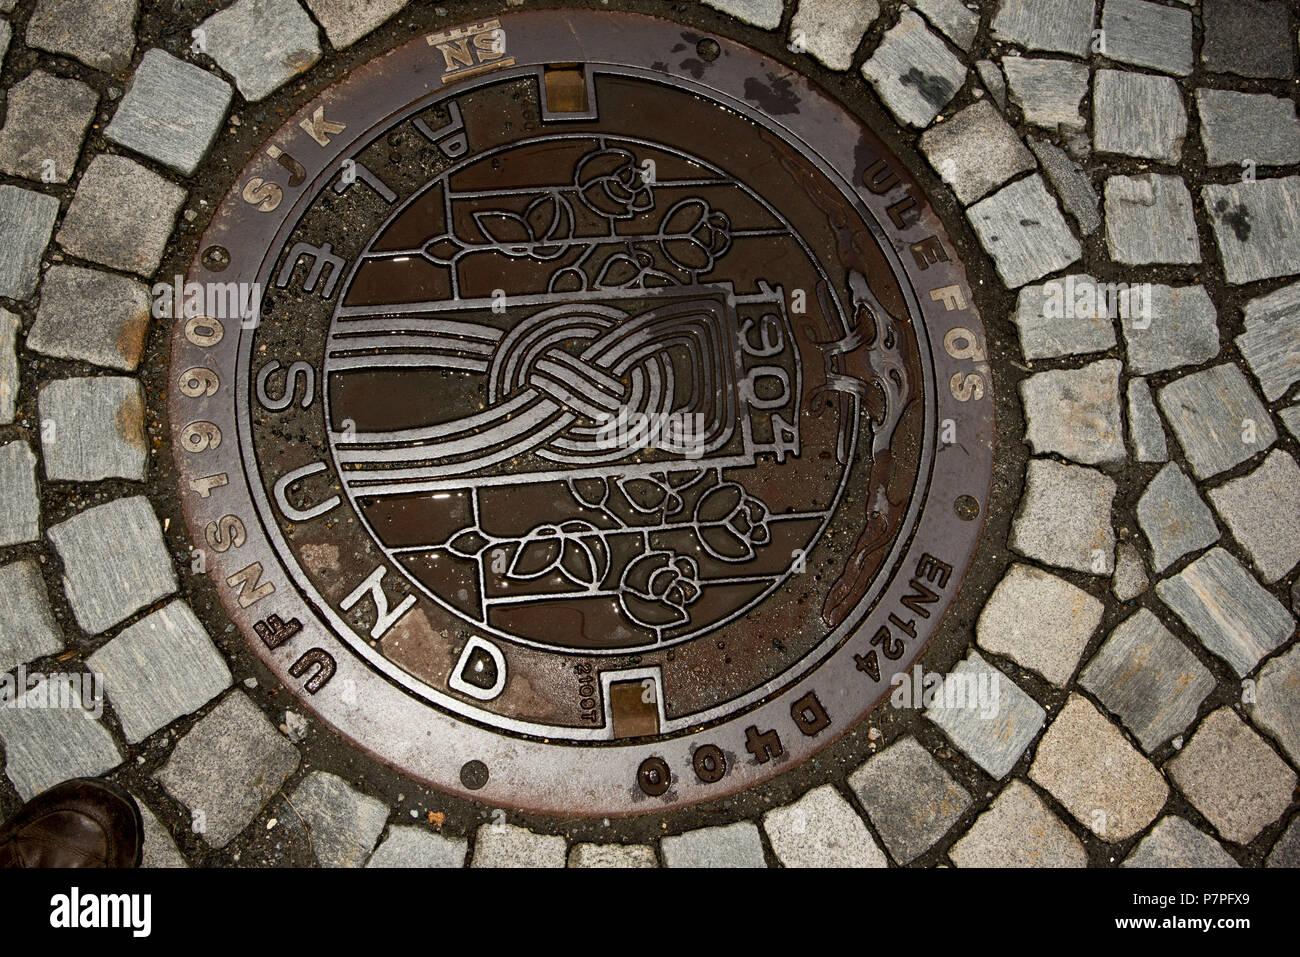 Roses and tower shown on manhole cover in Ålesund. Stock Photo